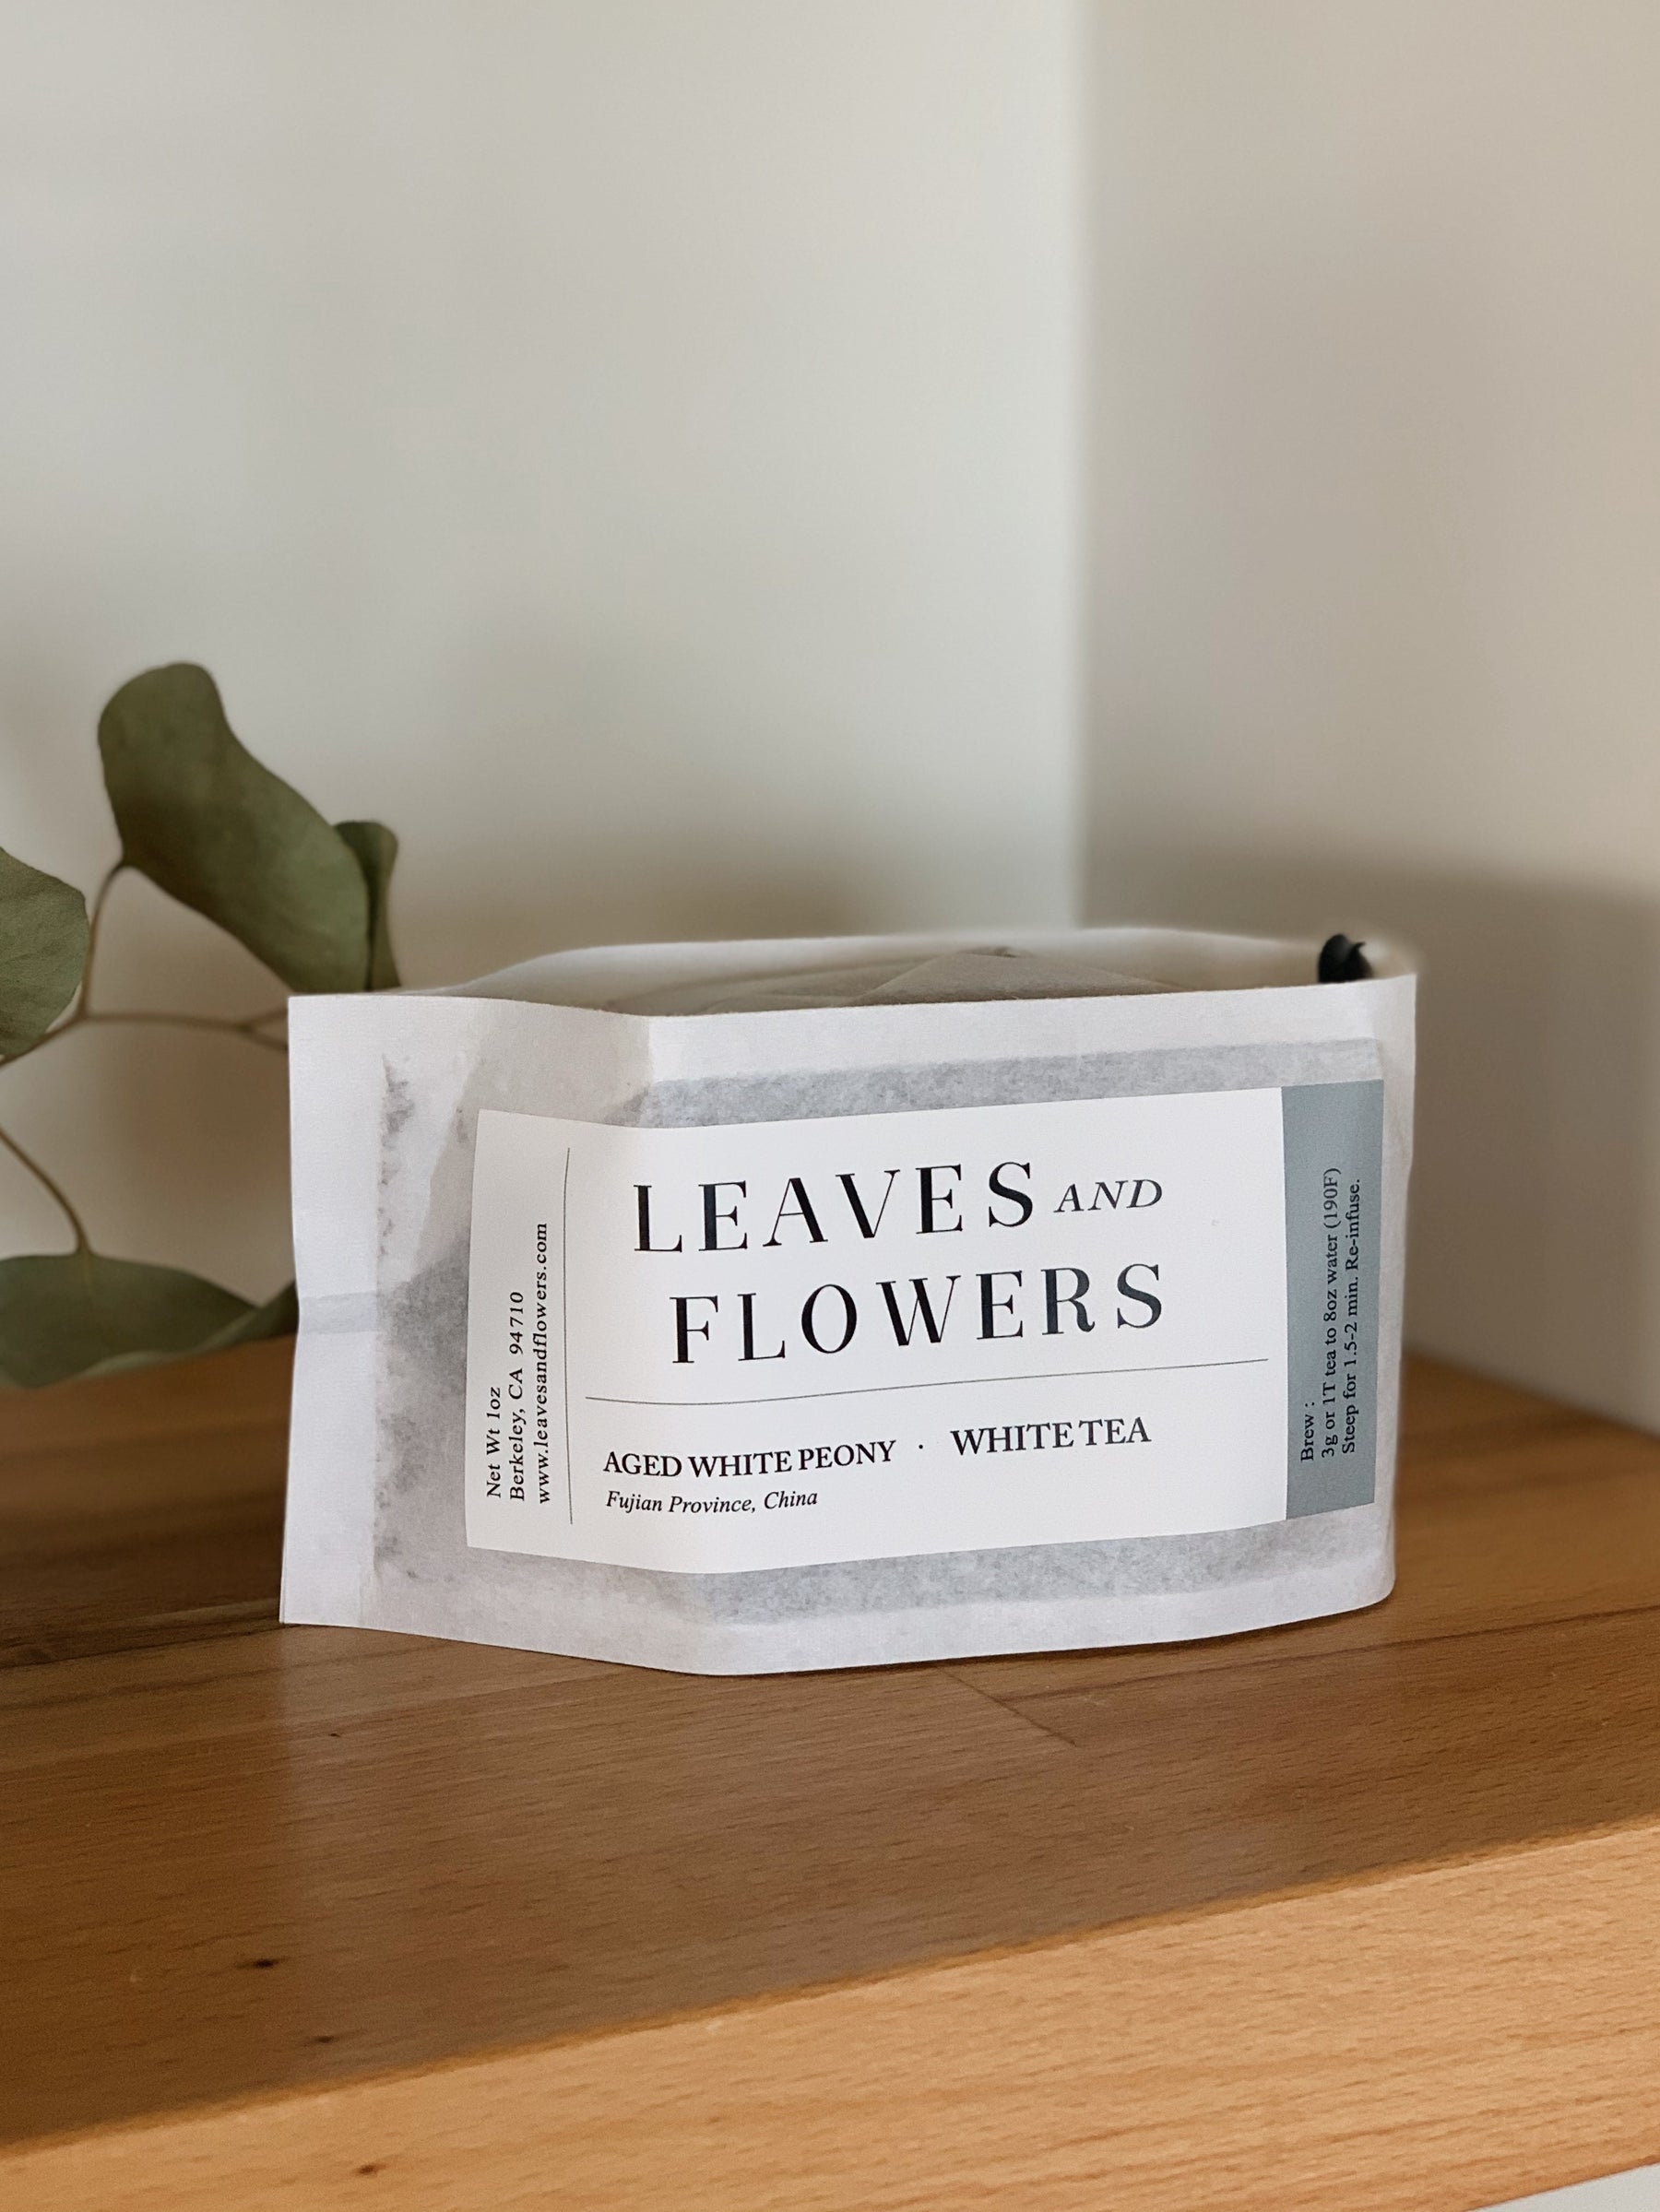 Aged White Peony Tea by Leaves & Flowers